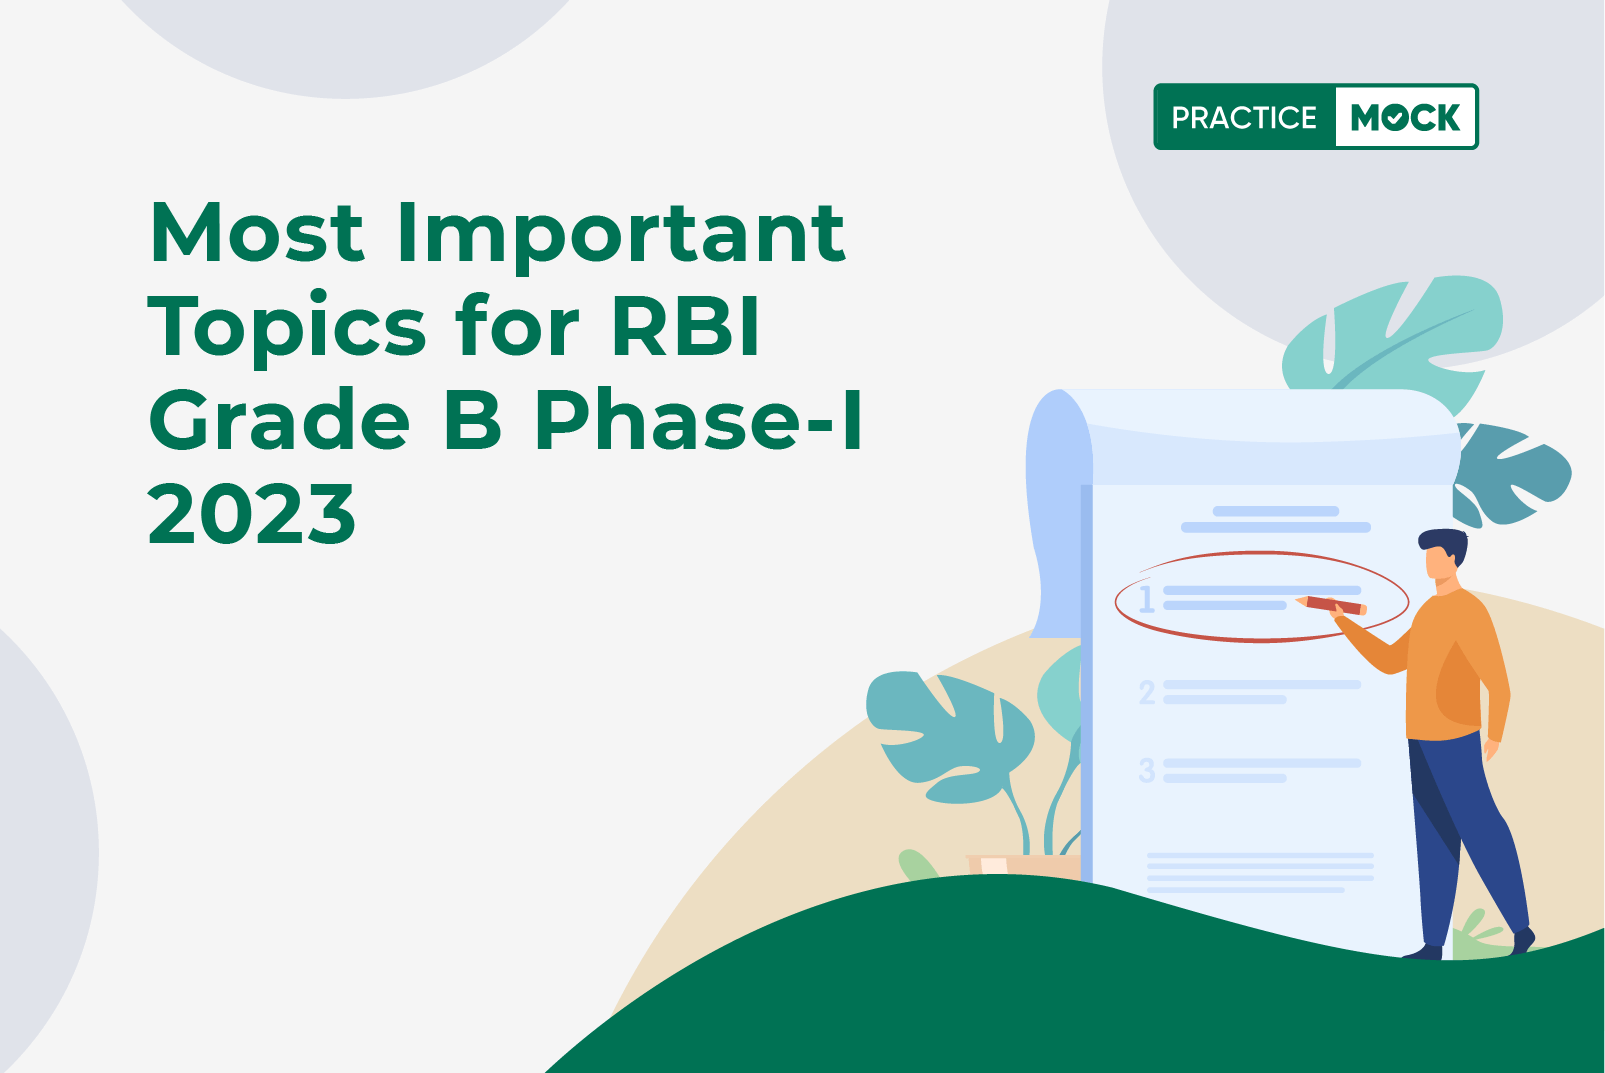 Most Important Topics for RBI Grade B Phase 1 2023